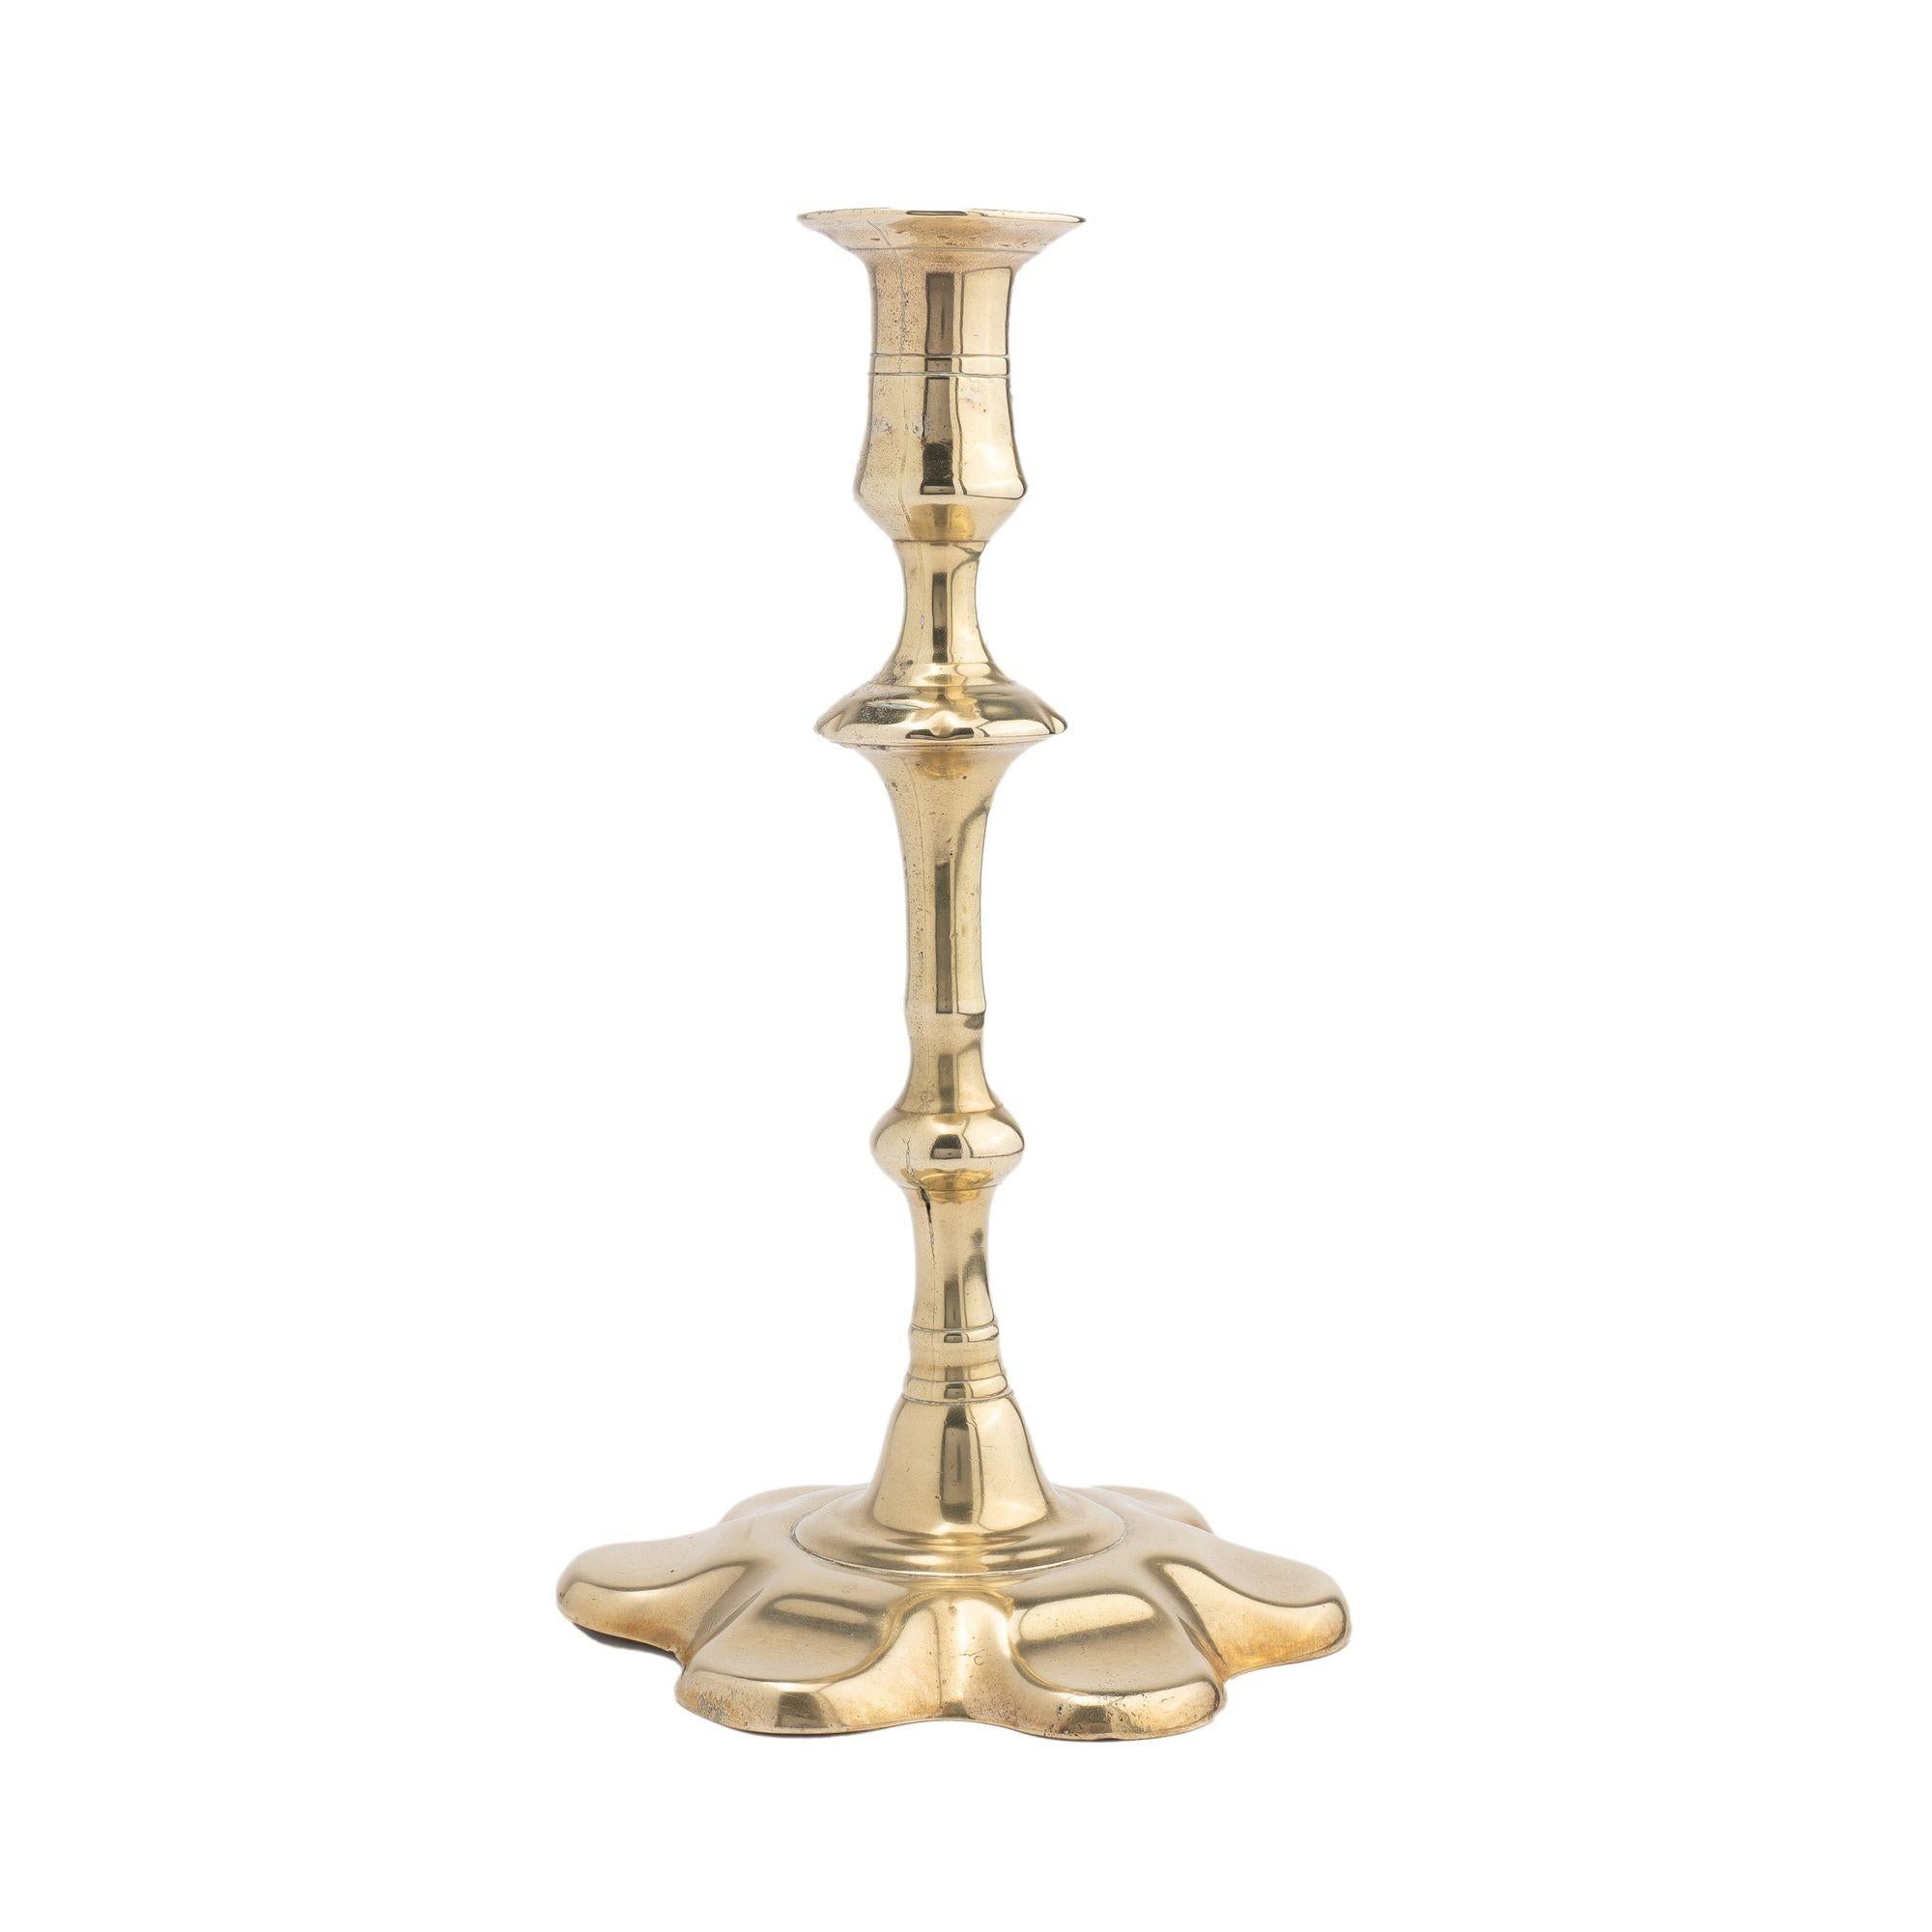 Petal base Queen Anne candlestick in seamed and cast brass. The candle cup incorporates a circular dished bobeshe and a slightly waisted cup with two medial score lines. The shaft has a compressed knob under the candle cup, supported by an inverted